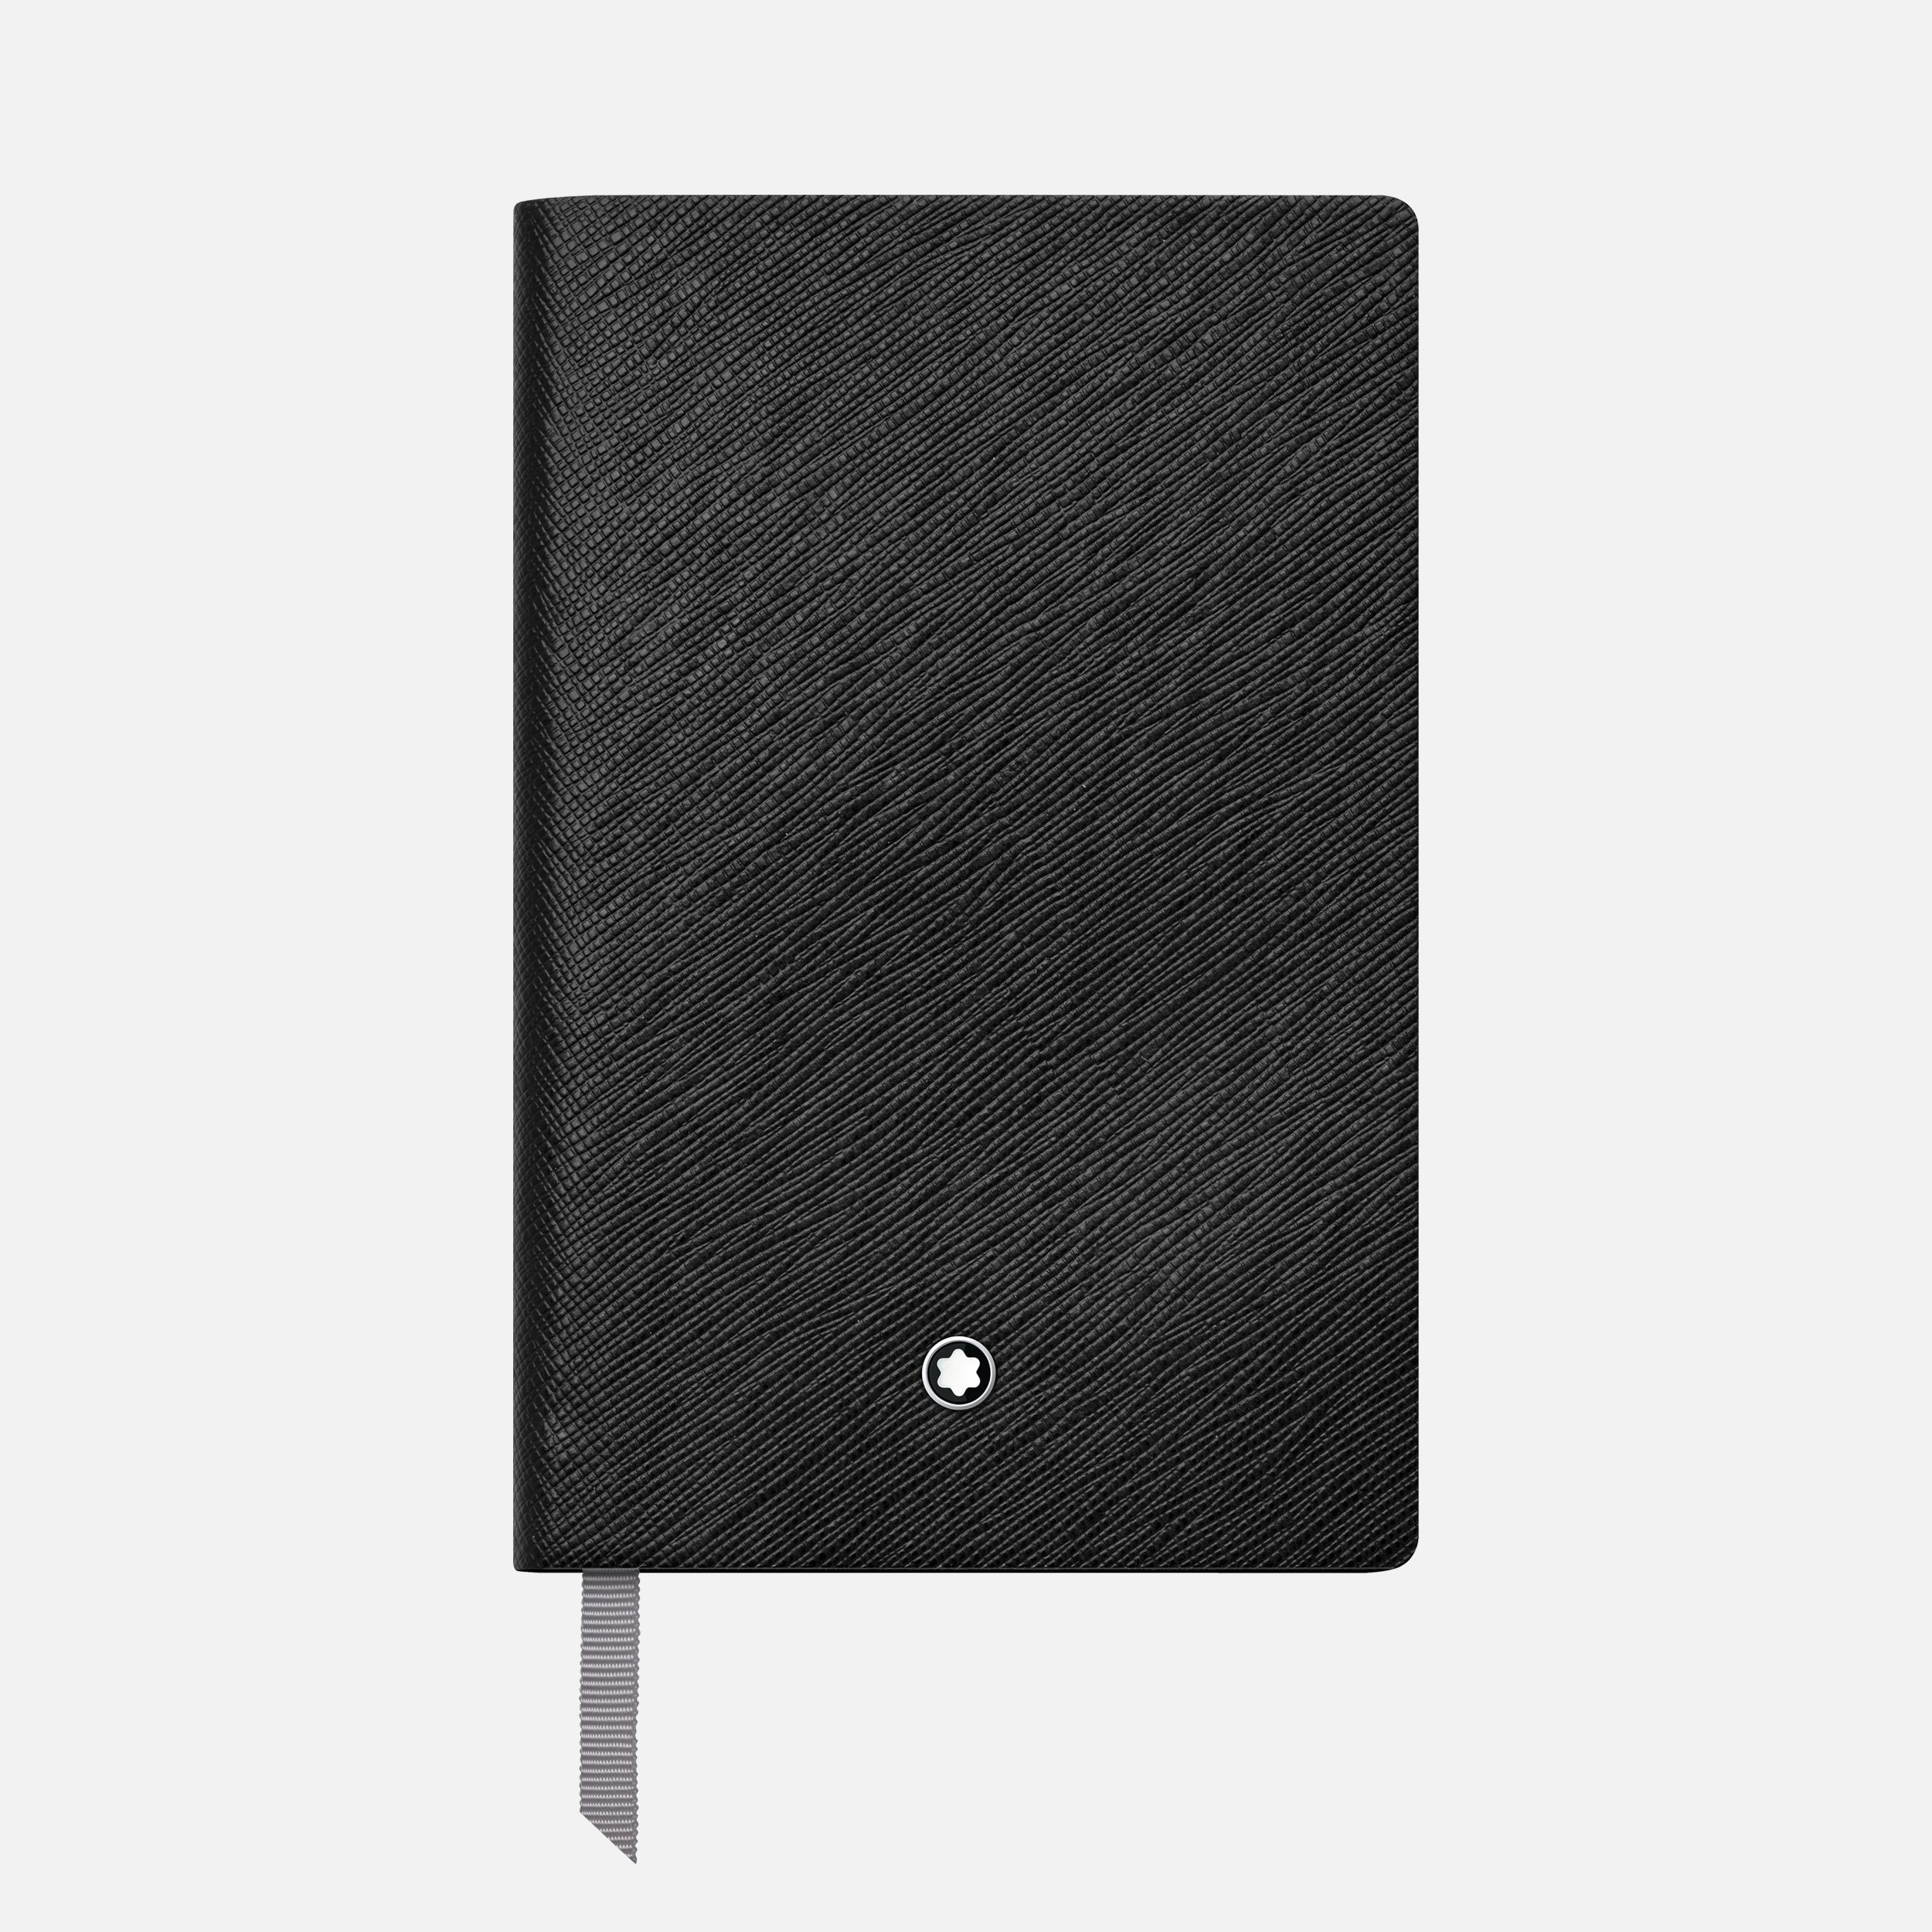 Montblanc Fine Stationery Notebook #148 Black, lined - 1